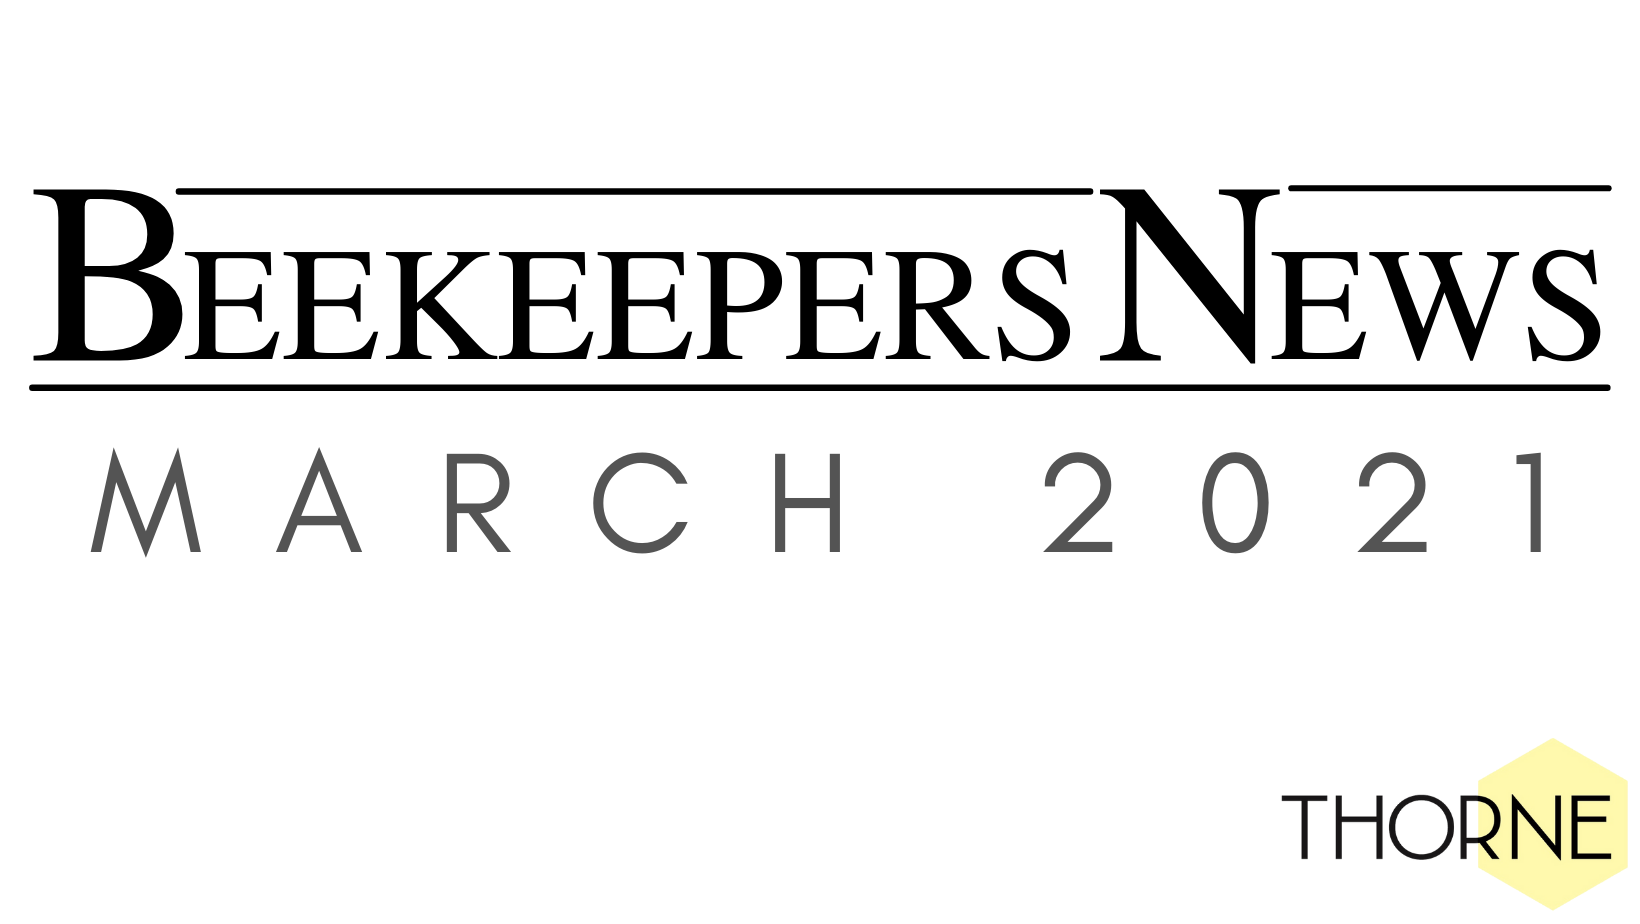 Beekeepers News - March 2021 - Issue 54